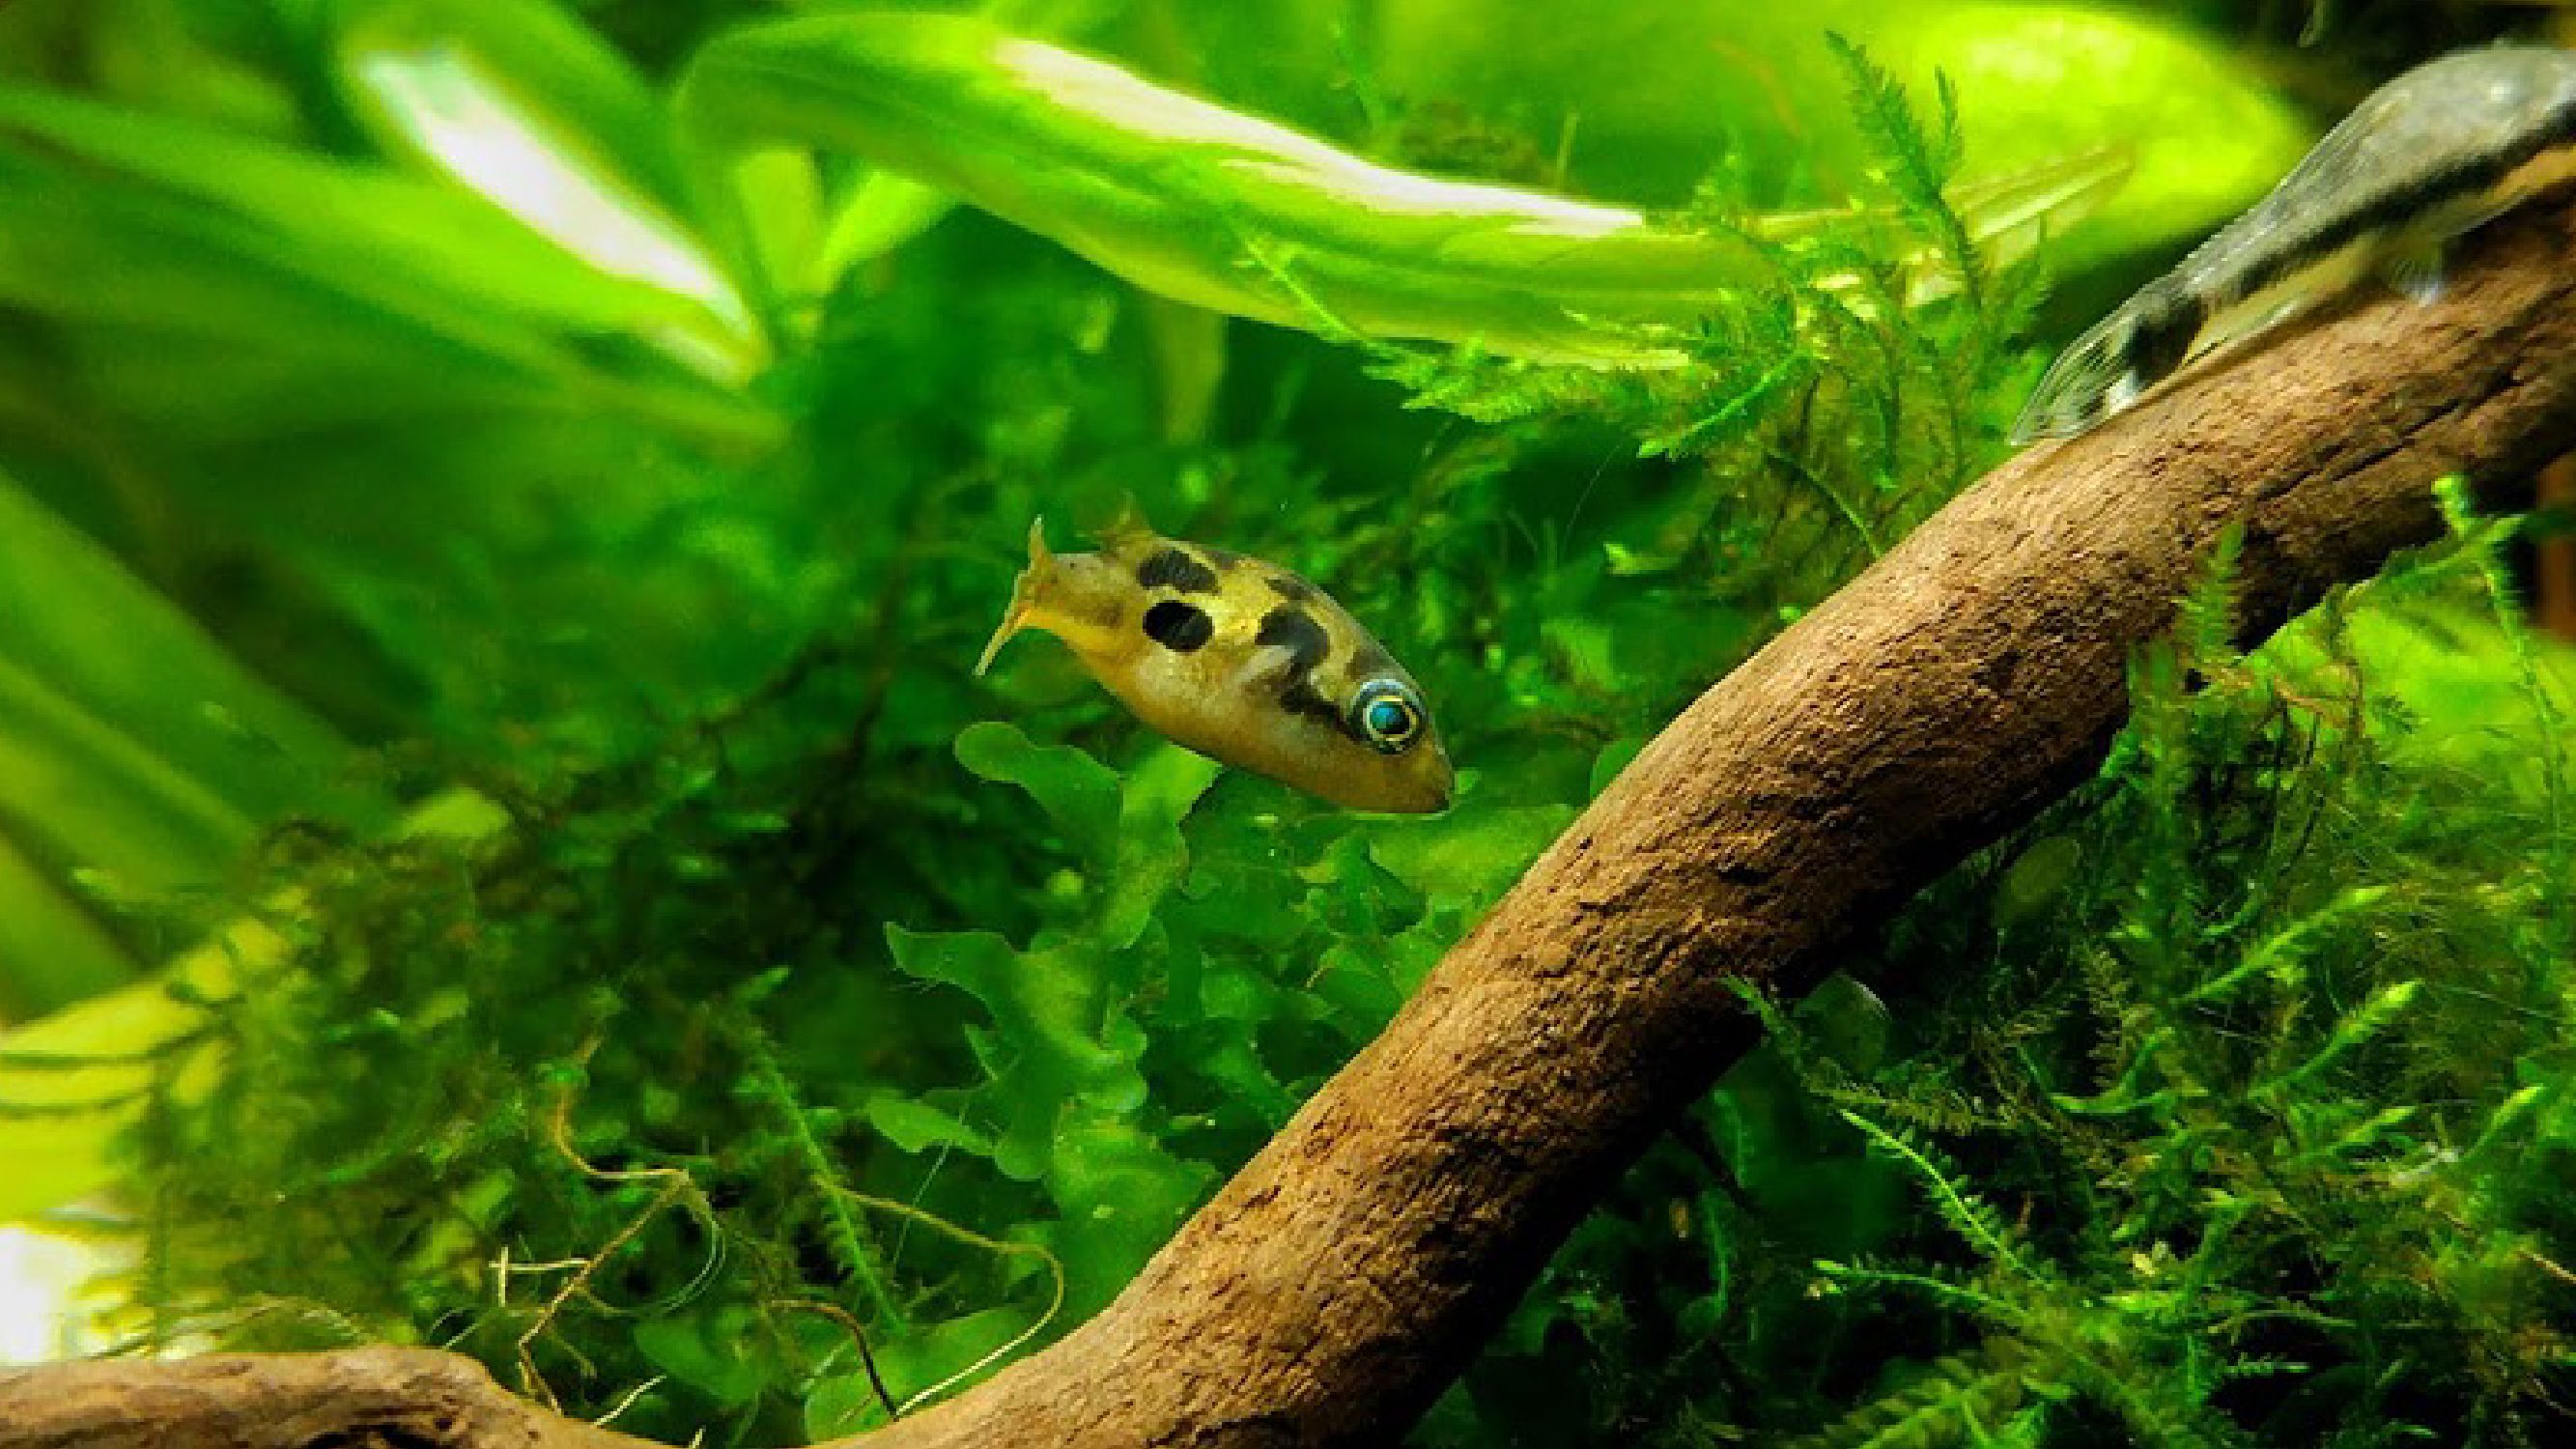 15 Small Freshwater Fish for Nano Aquariums (The Ultimate Guide)